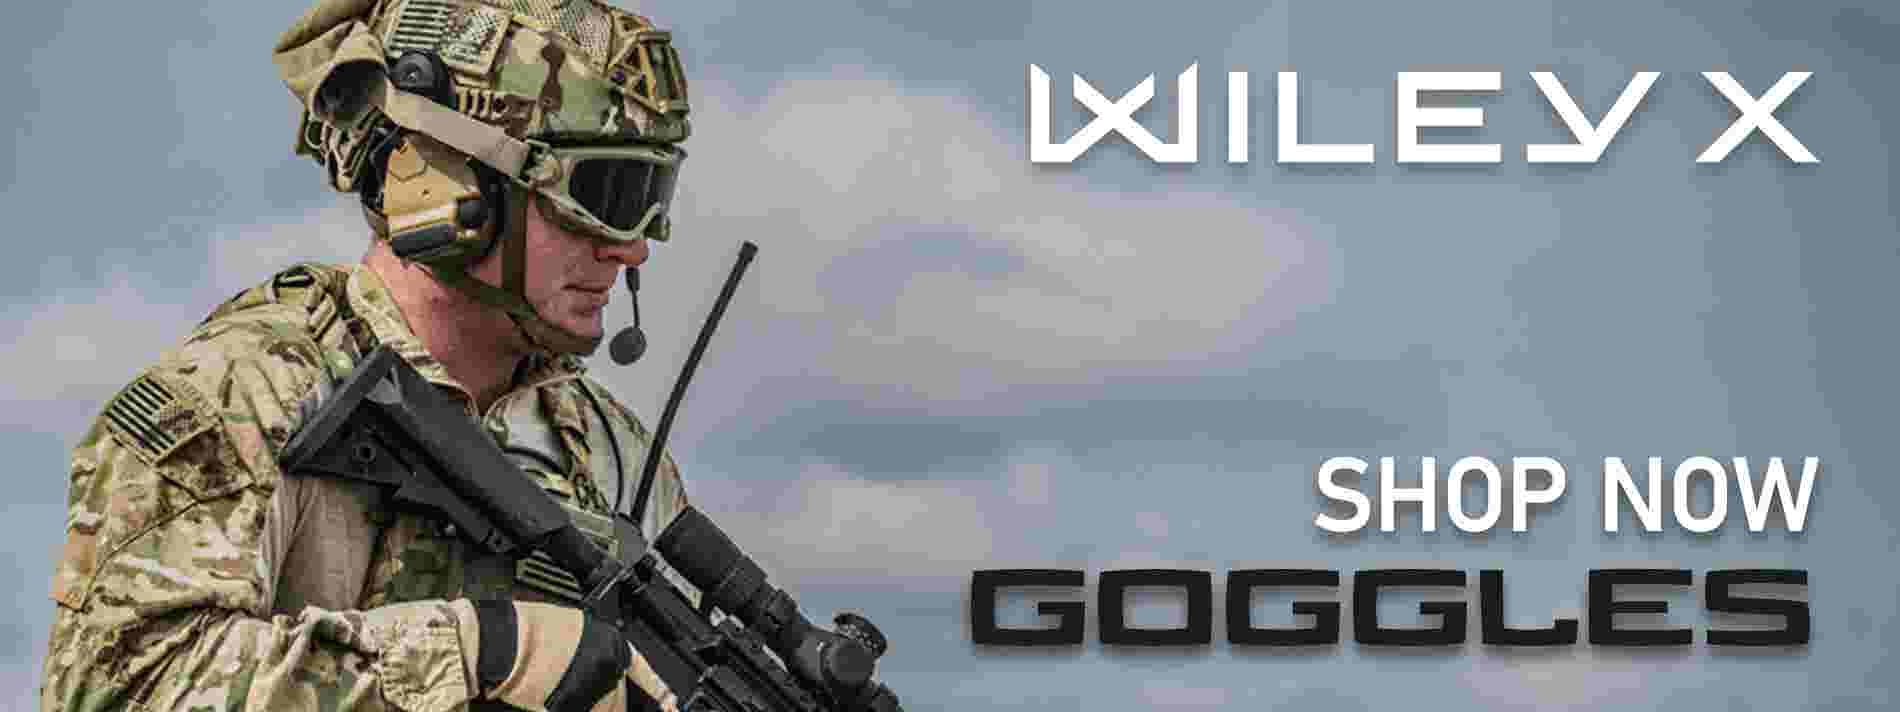 Wiley X: Shooting Safety, Apparel